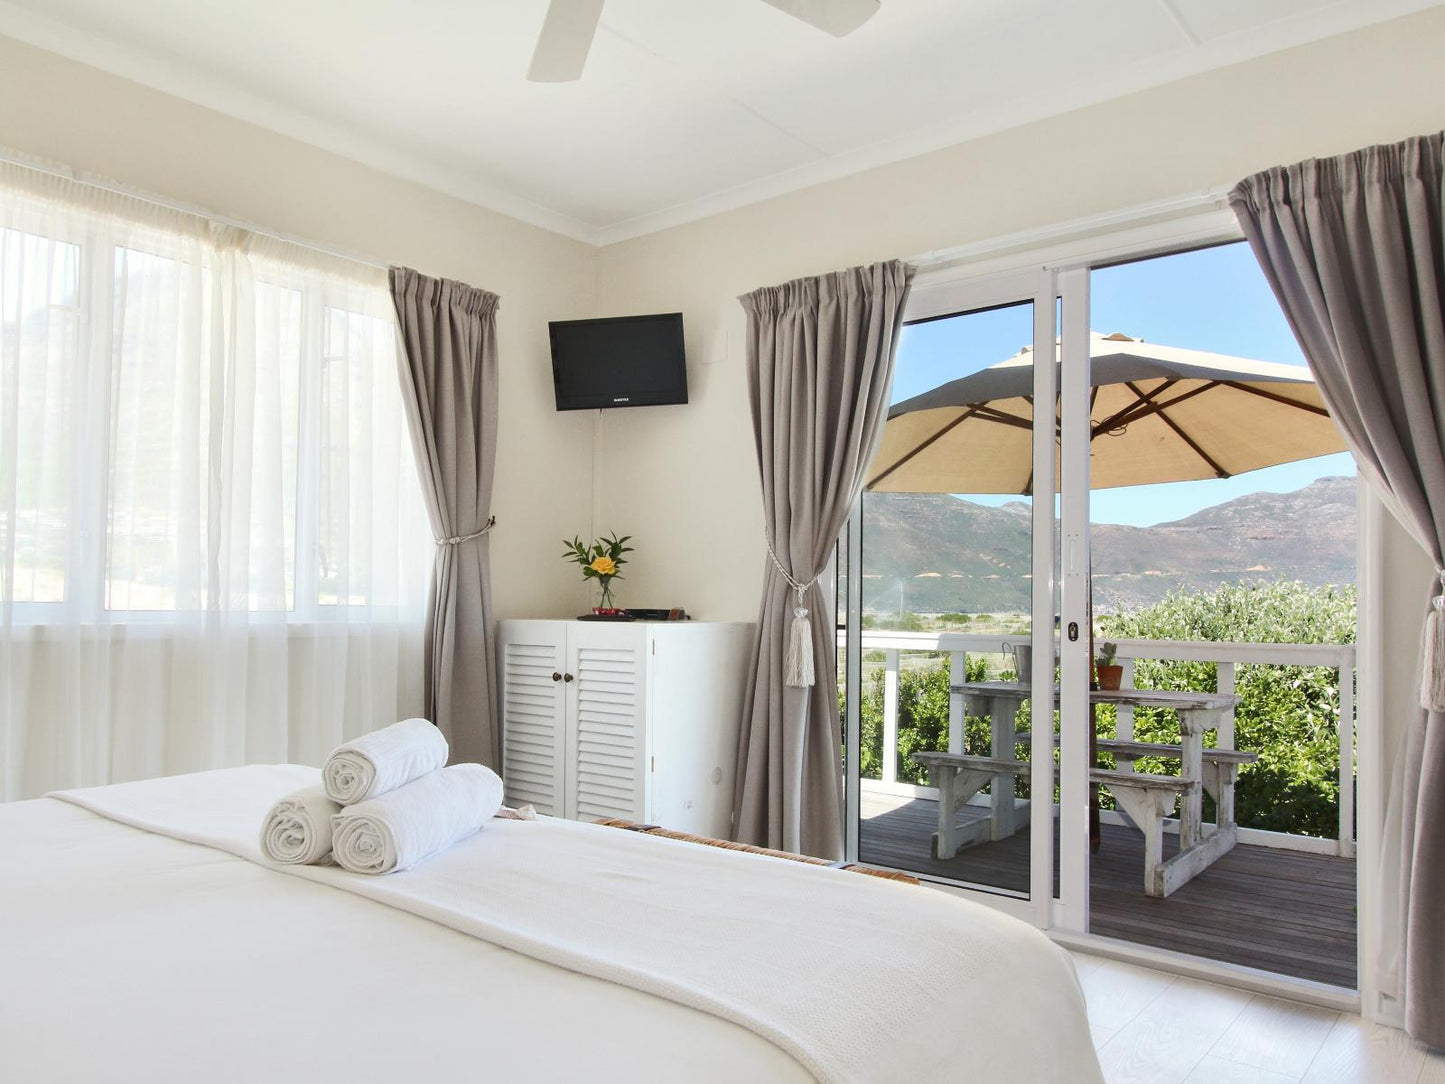 Deluxe Room 2 Super King Size Bed @ Beach House Guest House - Hout Bay